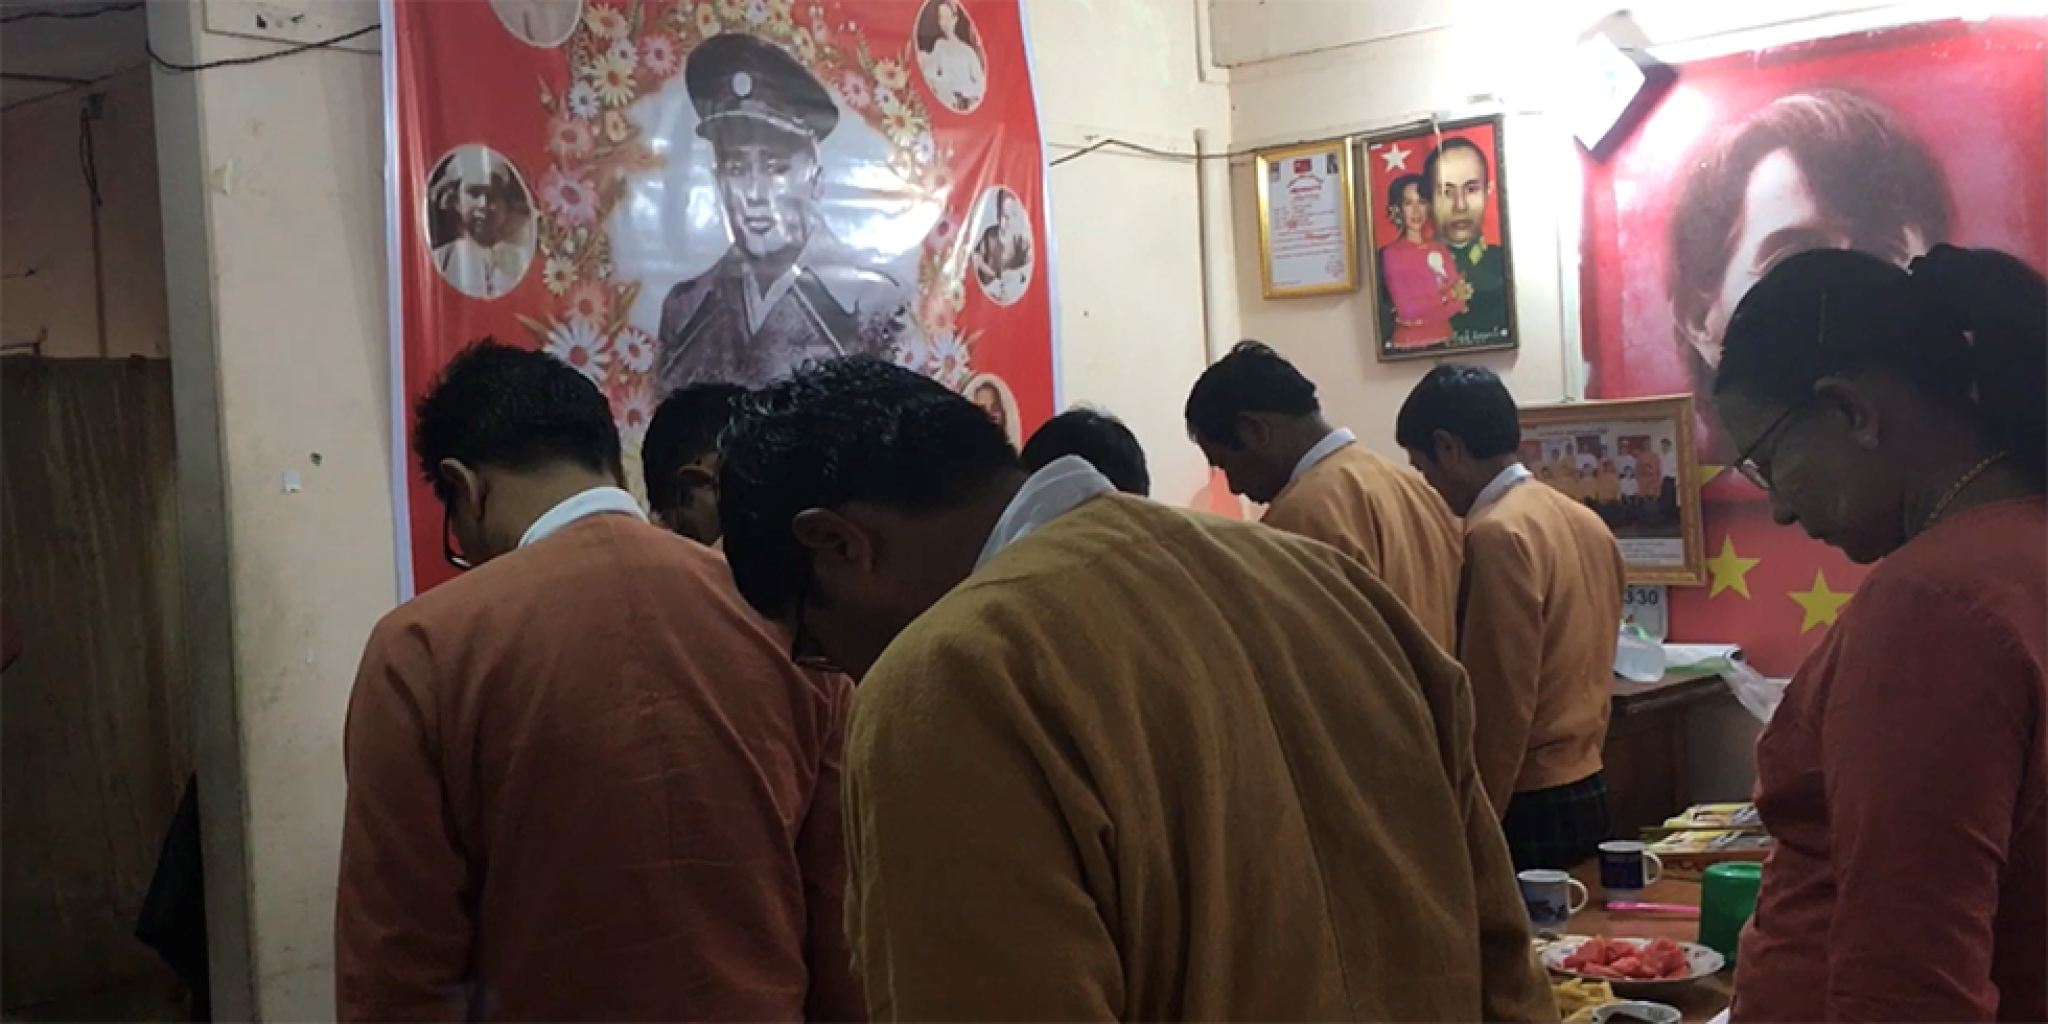 Former political prisoners, activists, and civilian supporters perform the traditional ‘aleipyu’ to honour fallen martyrs of the democracy movement at the NLD’s office in Thingangyun, Yangon.